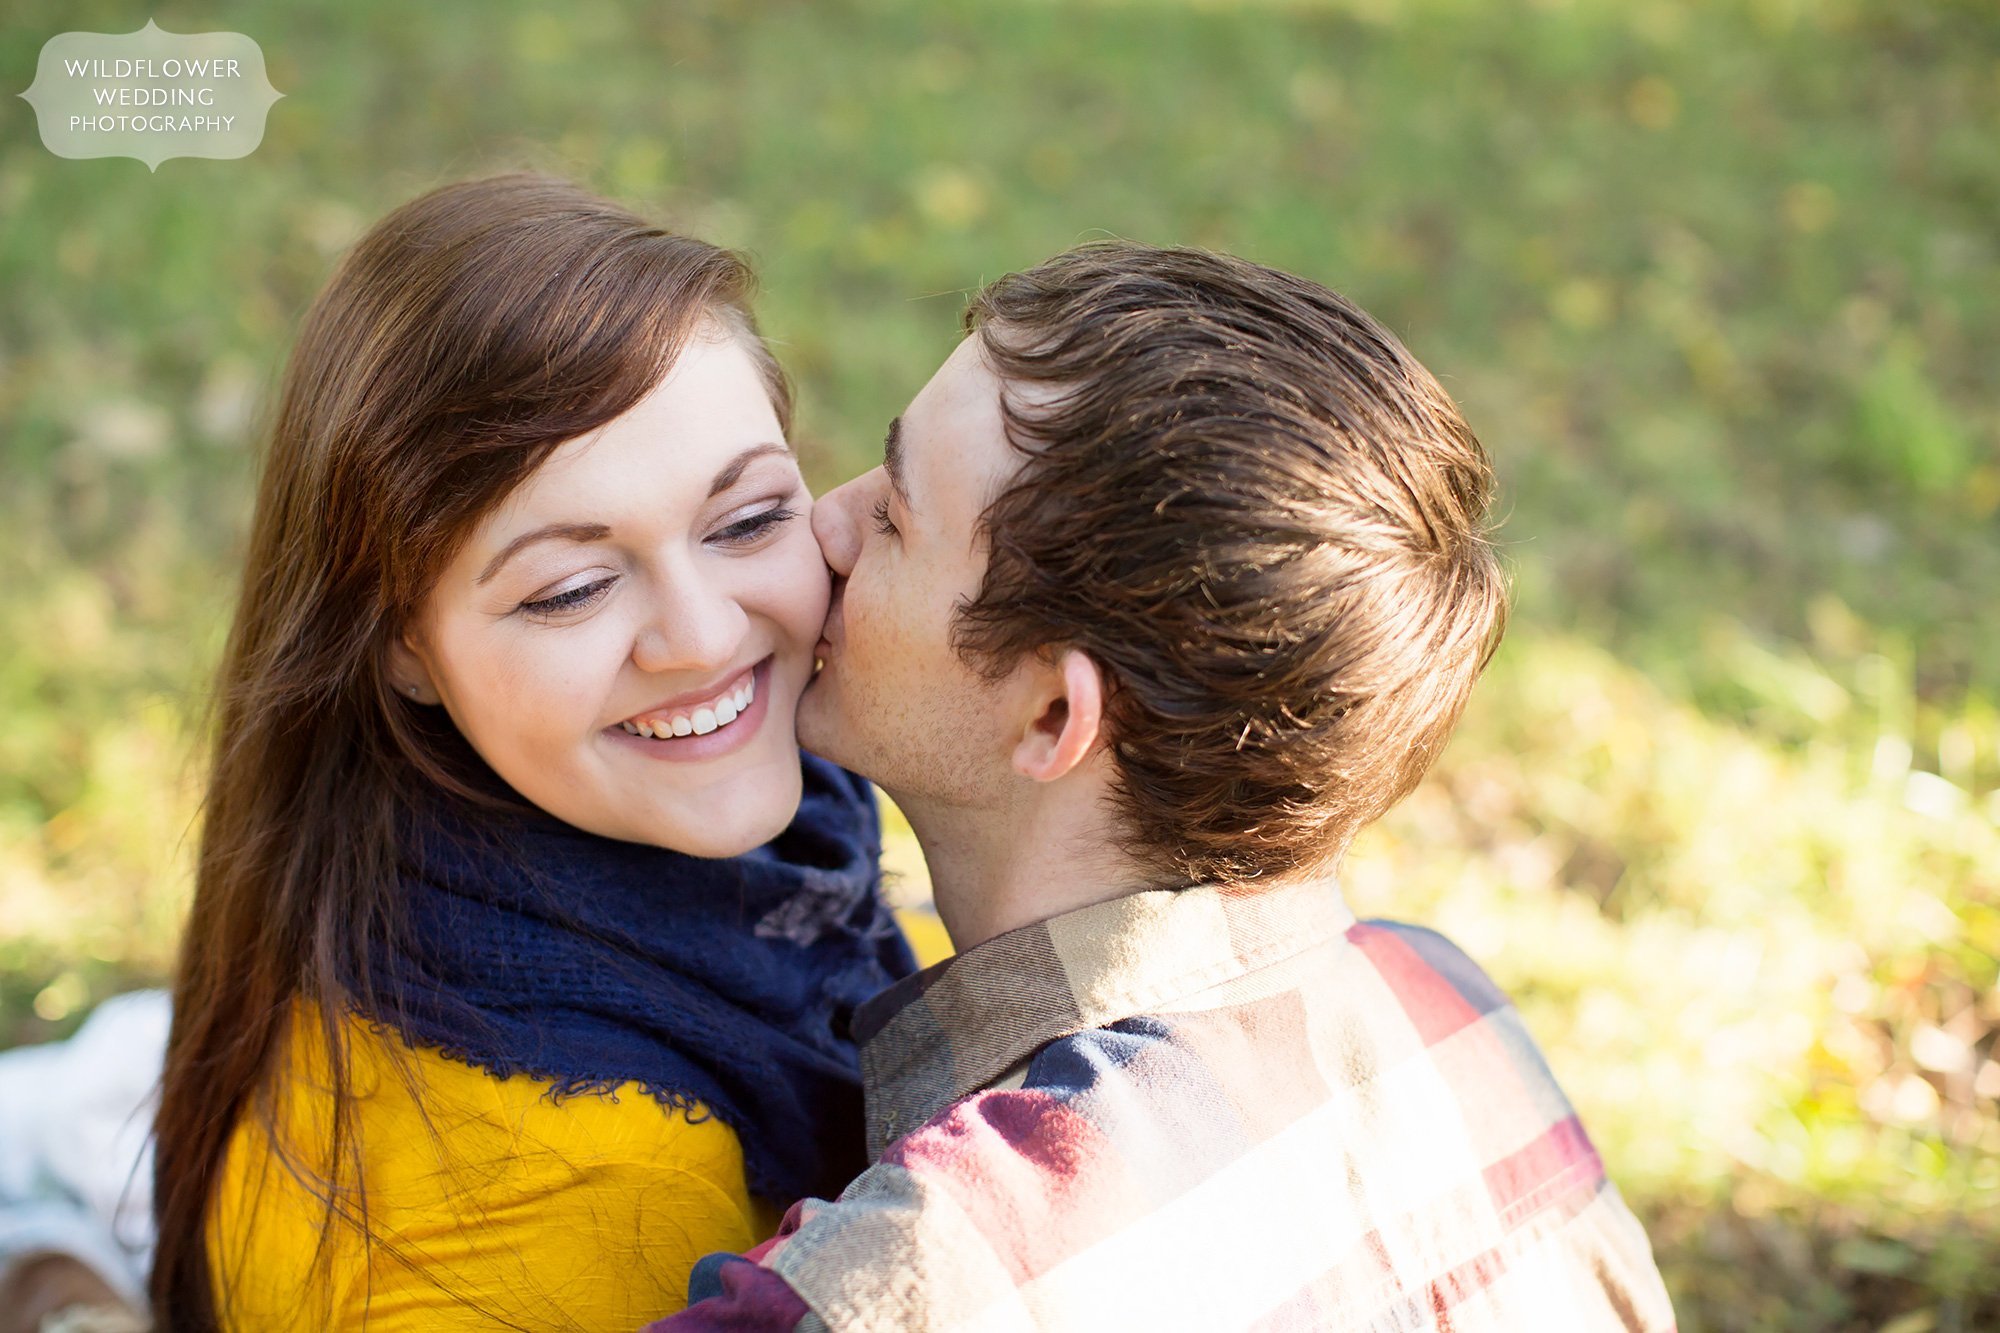 Boy kissing girl on the cheek during their autumn engagement session at Nifong Park in Columbia, MO.